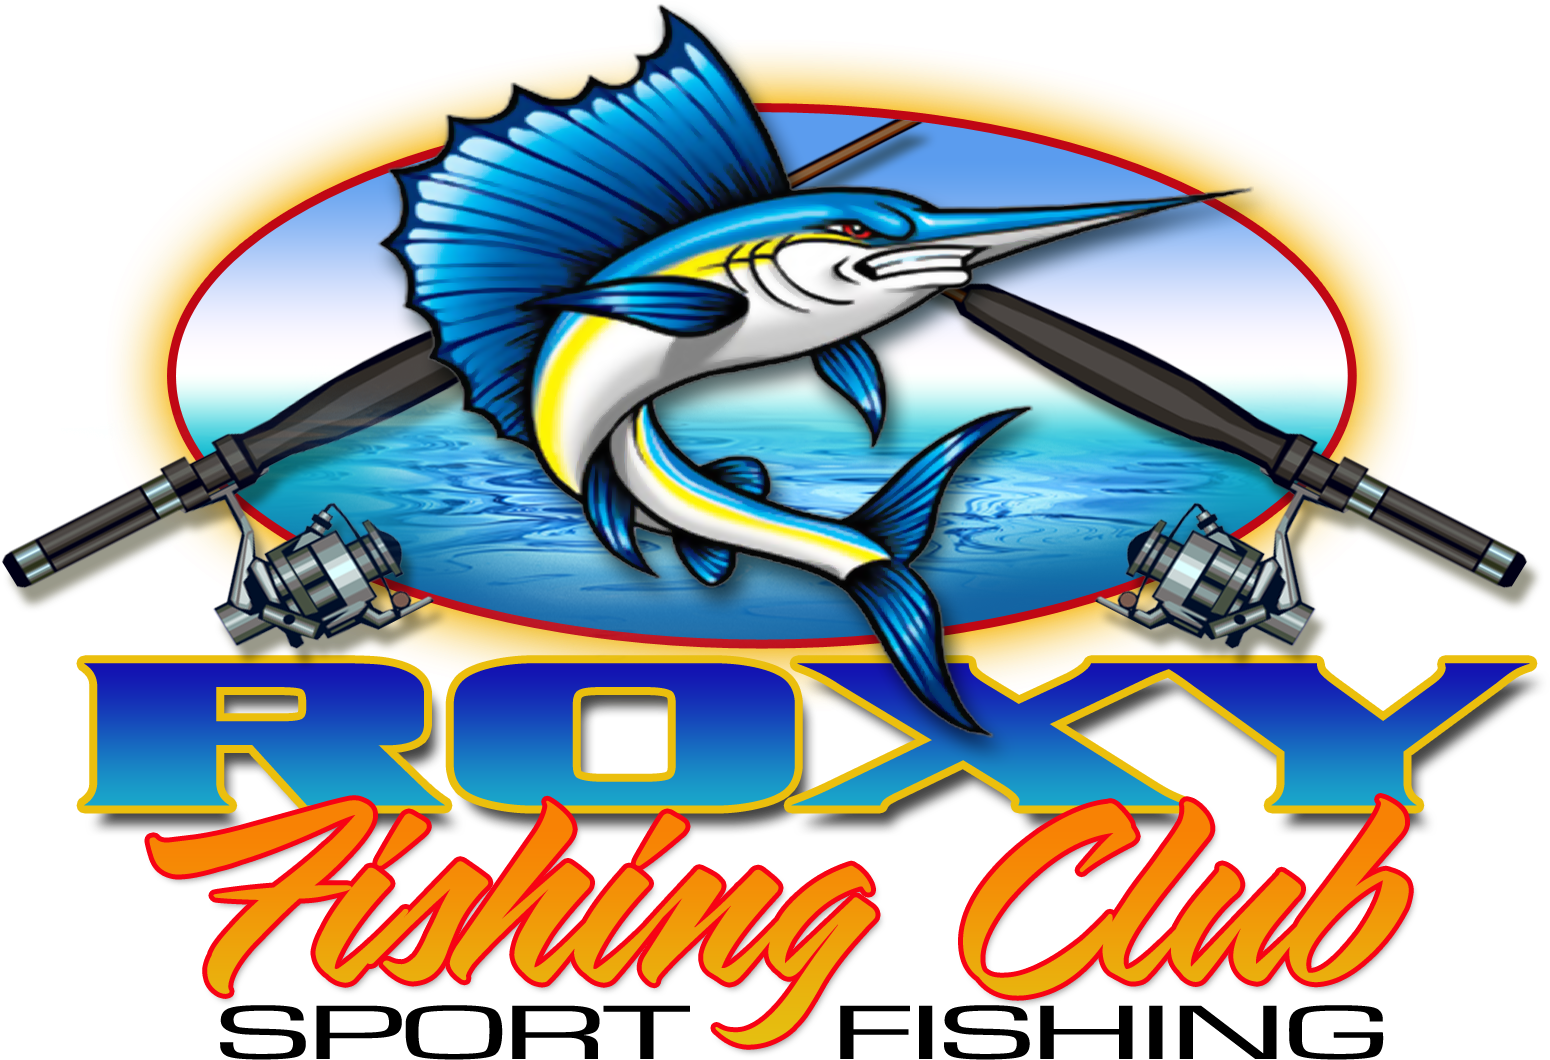 The 17 Best Roxy Fishing Club Images On Pinterest - Graphic Design (1800x1200)